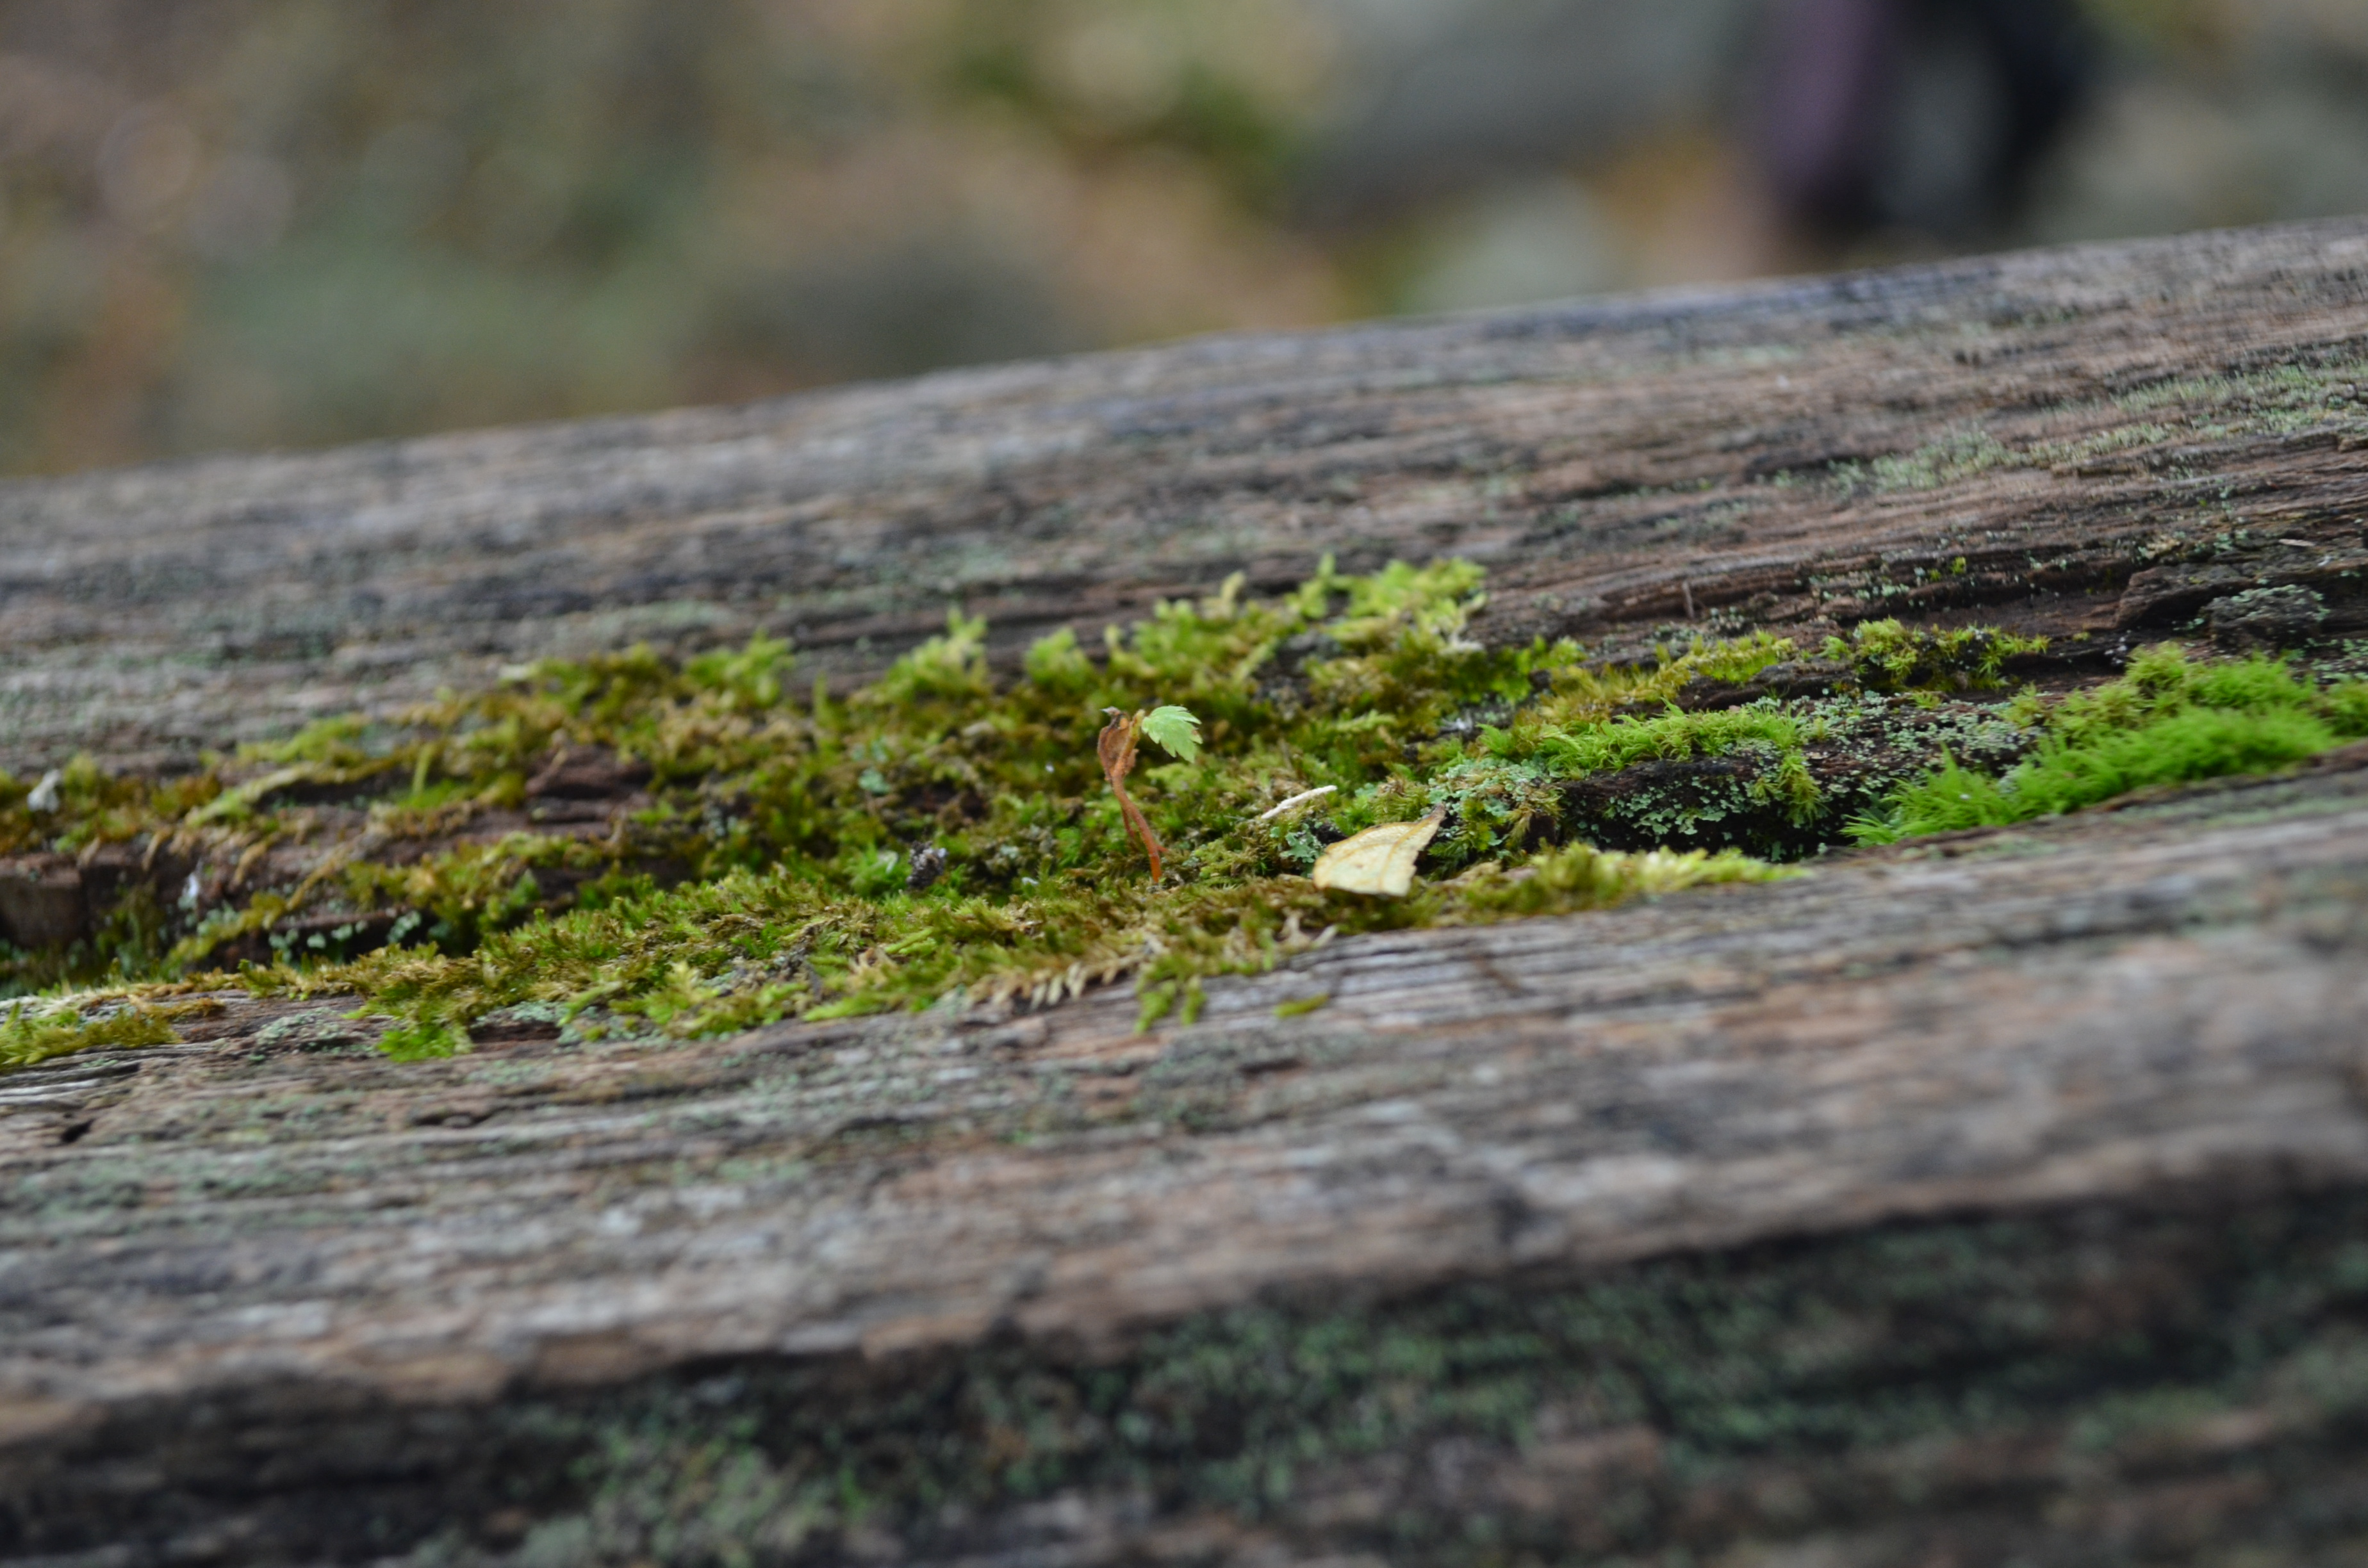 Bryophilia: A Moss Love Story, by Christina Catanese